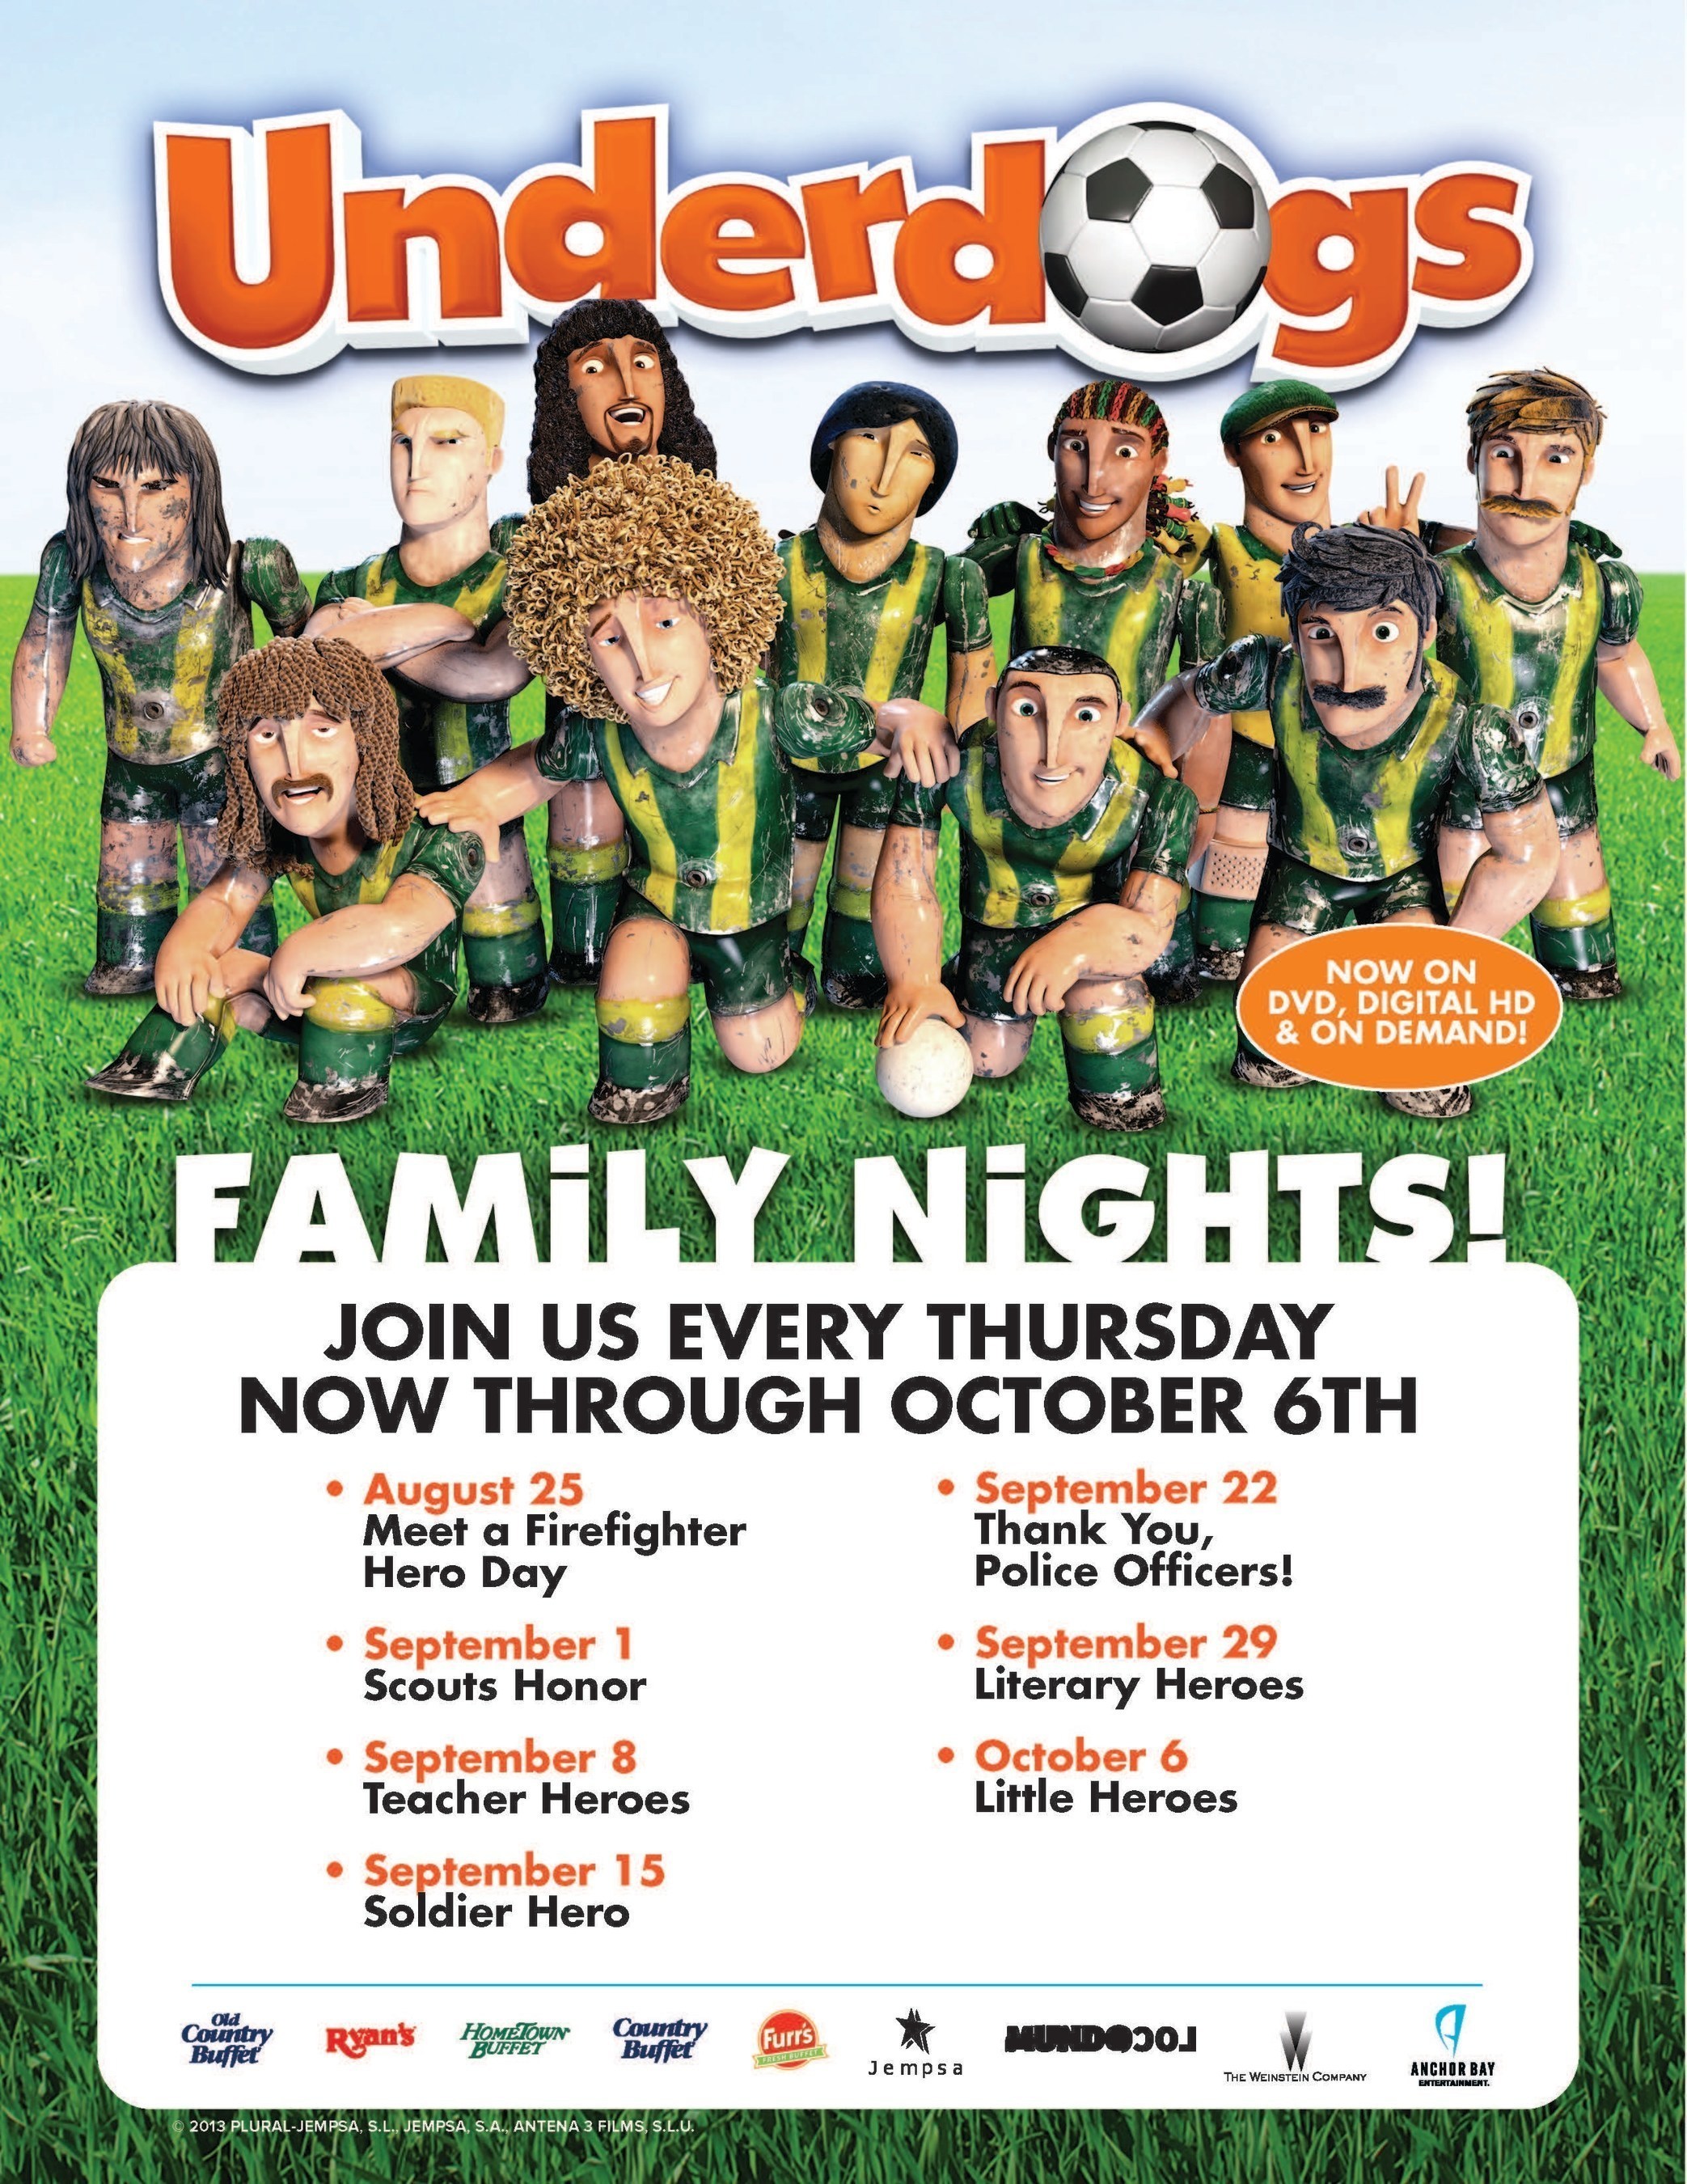 Ovation Brands(R) and Furr's Fresh Buffet(R) present Underdogs Family Night from August 25th through October 6th.